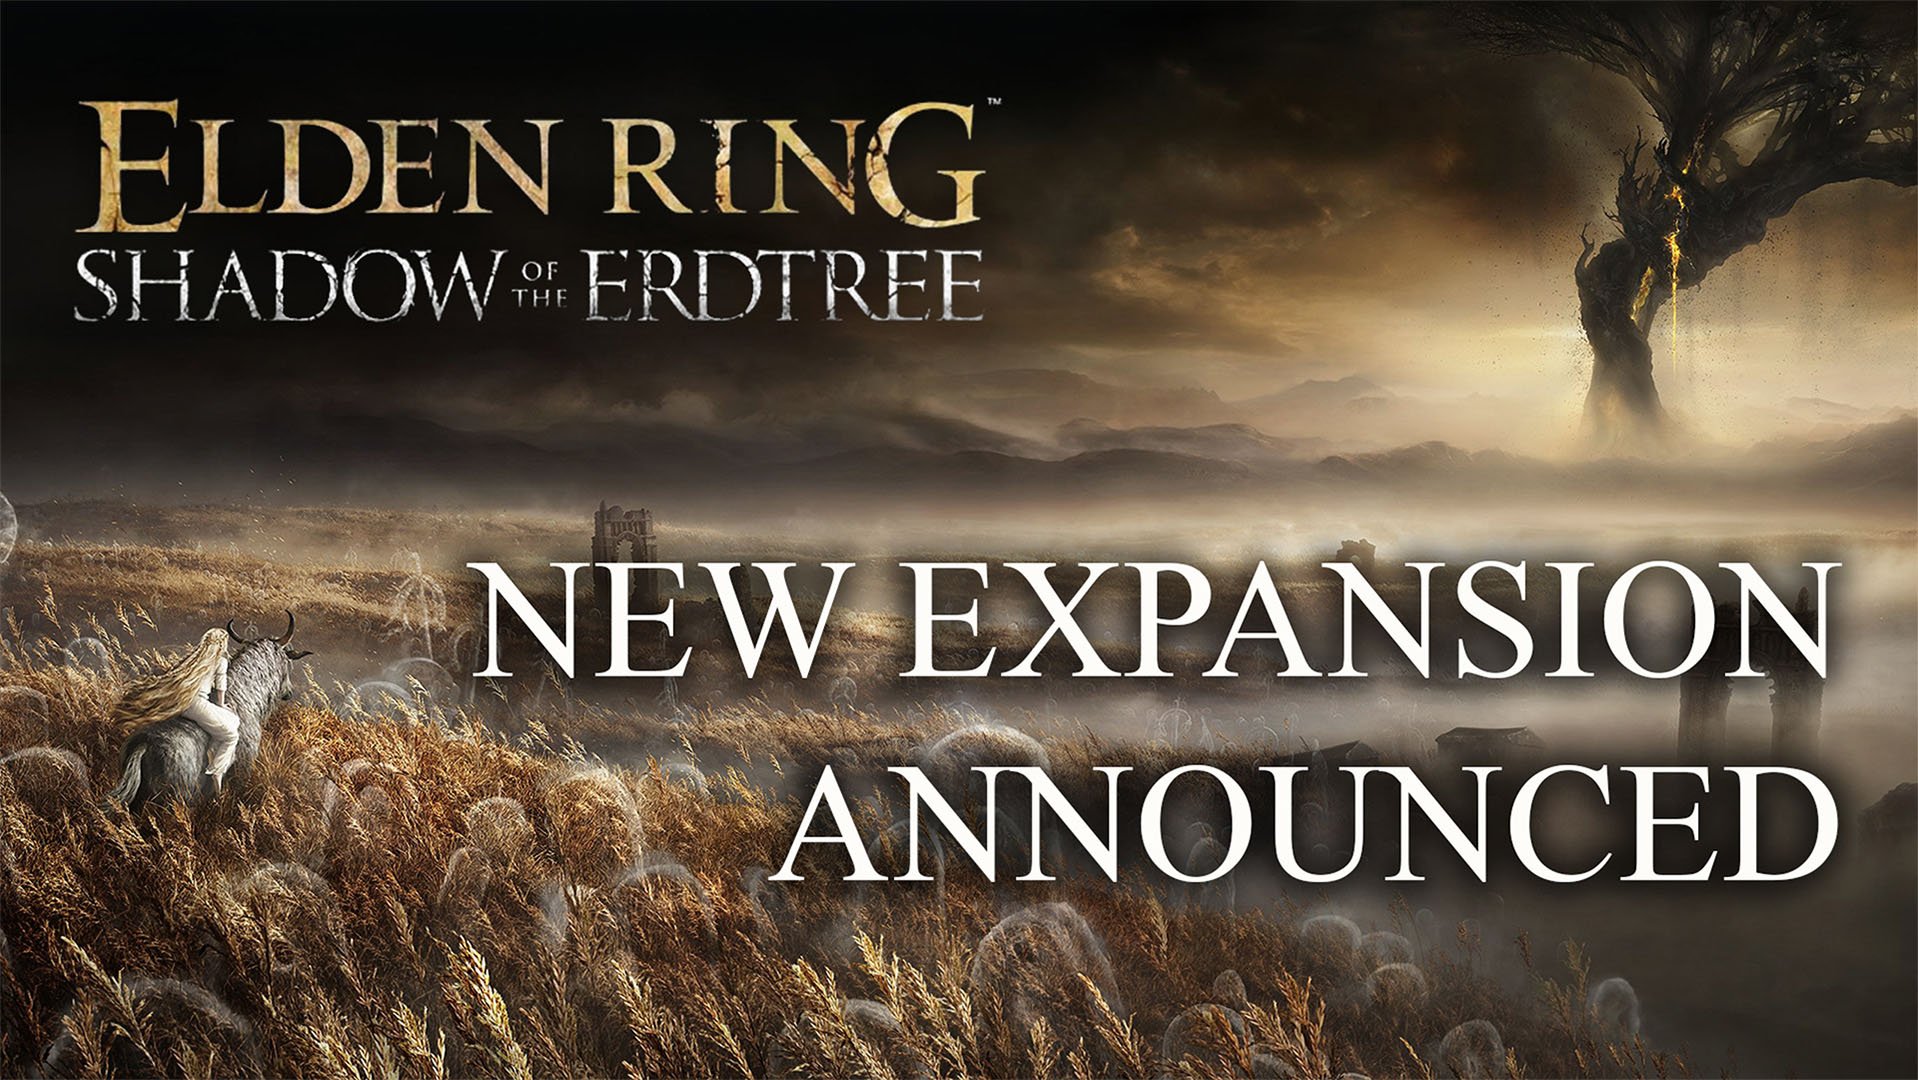 Expansion Ring. Elden Ring Shadow of the NERDTREE. Купить elden ring shadow of the erdtree